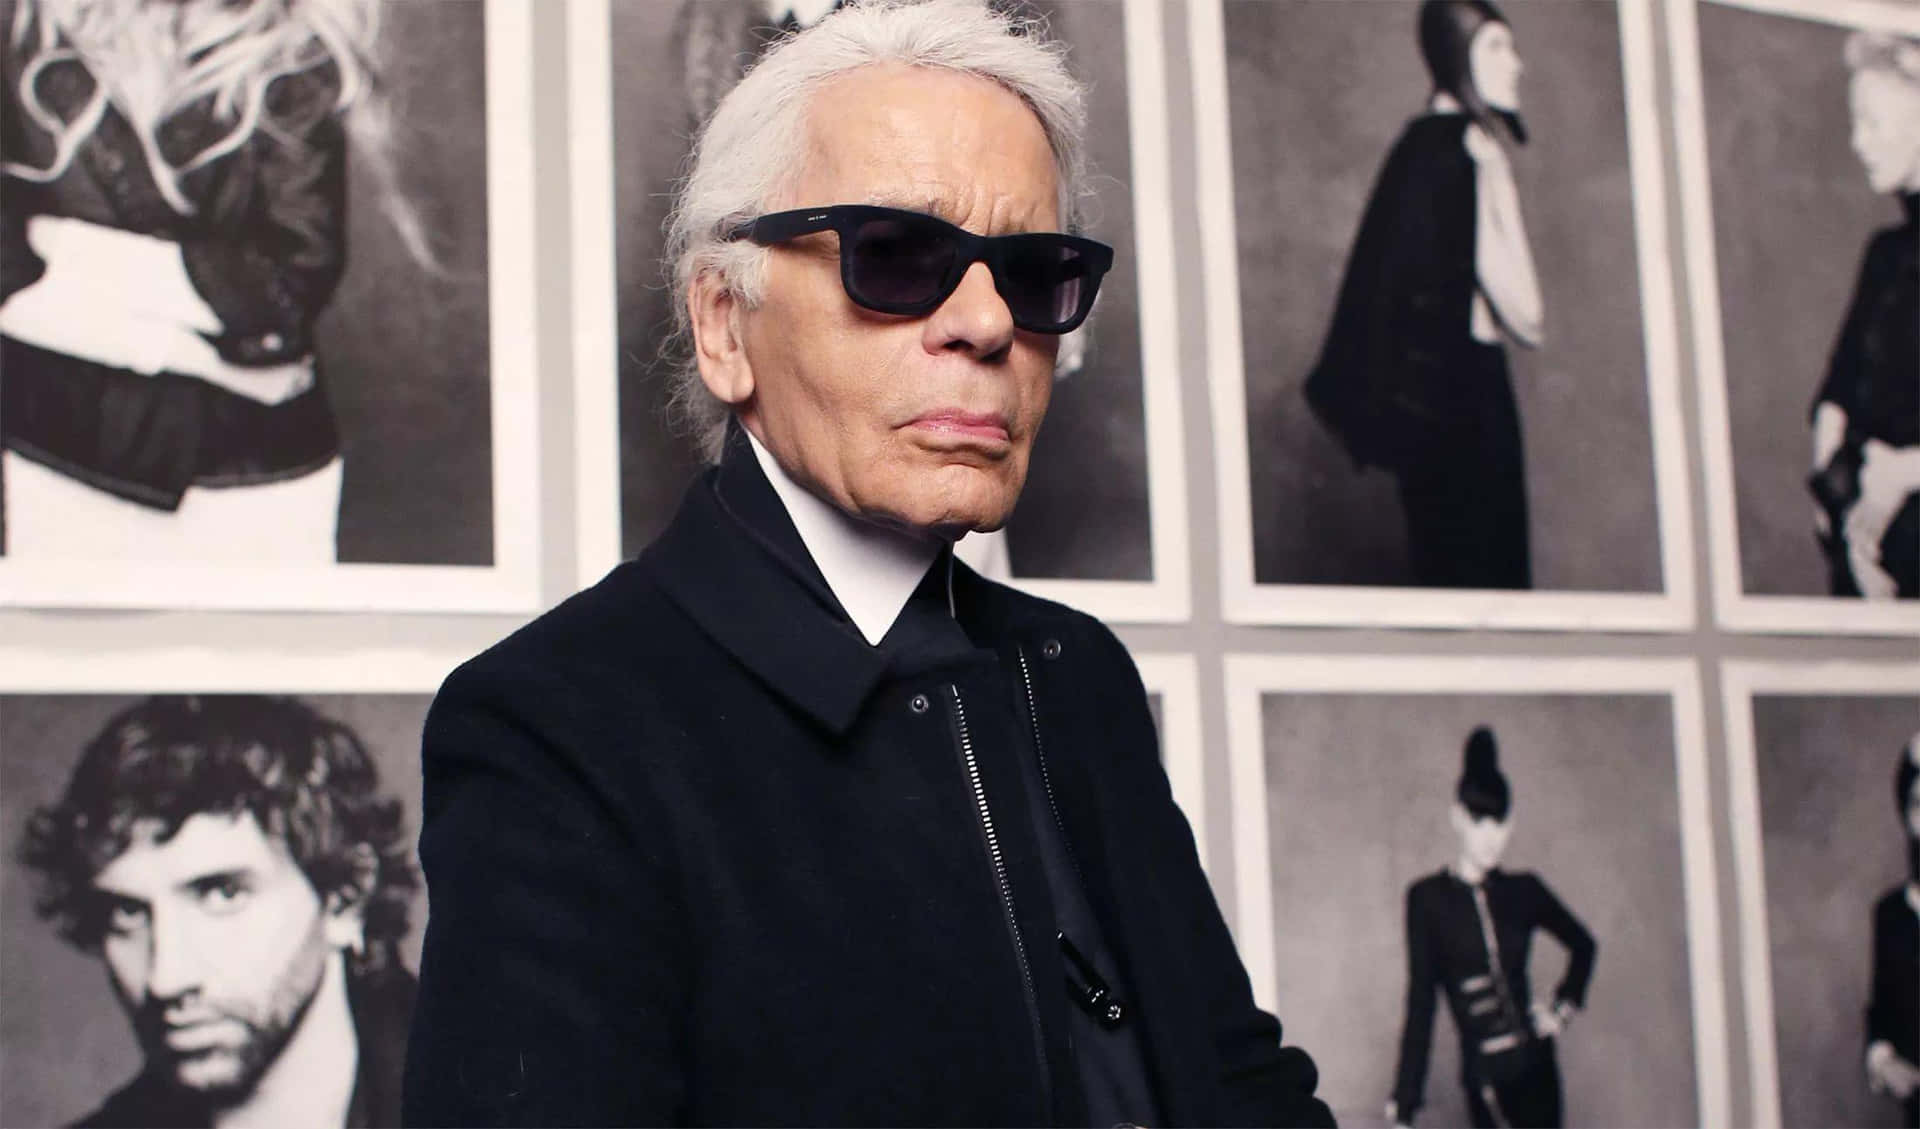 Karl Lagerfeld - A Man In Sunglasses Standing In Front Of A Wall Of Photos Wallpaper